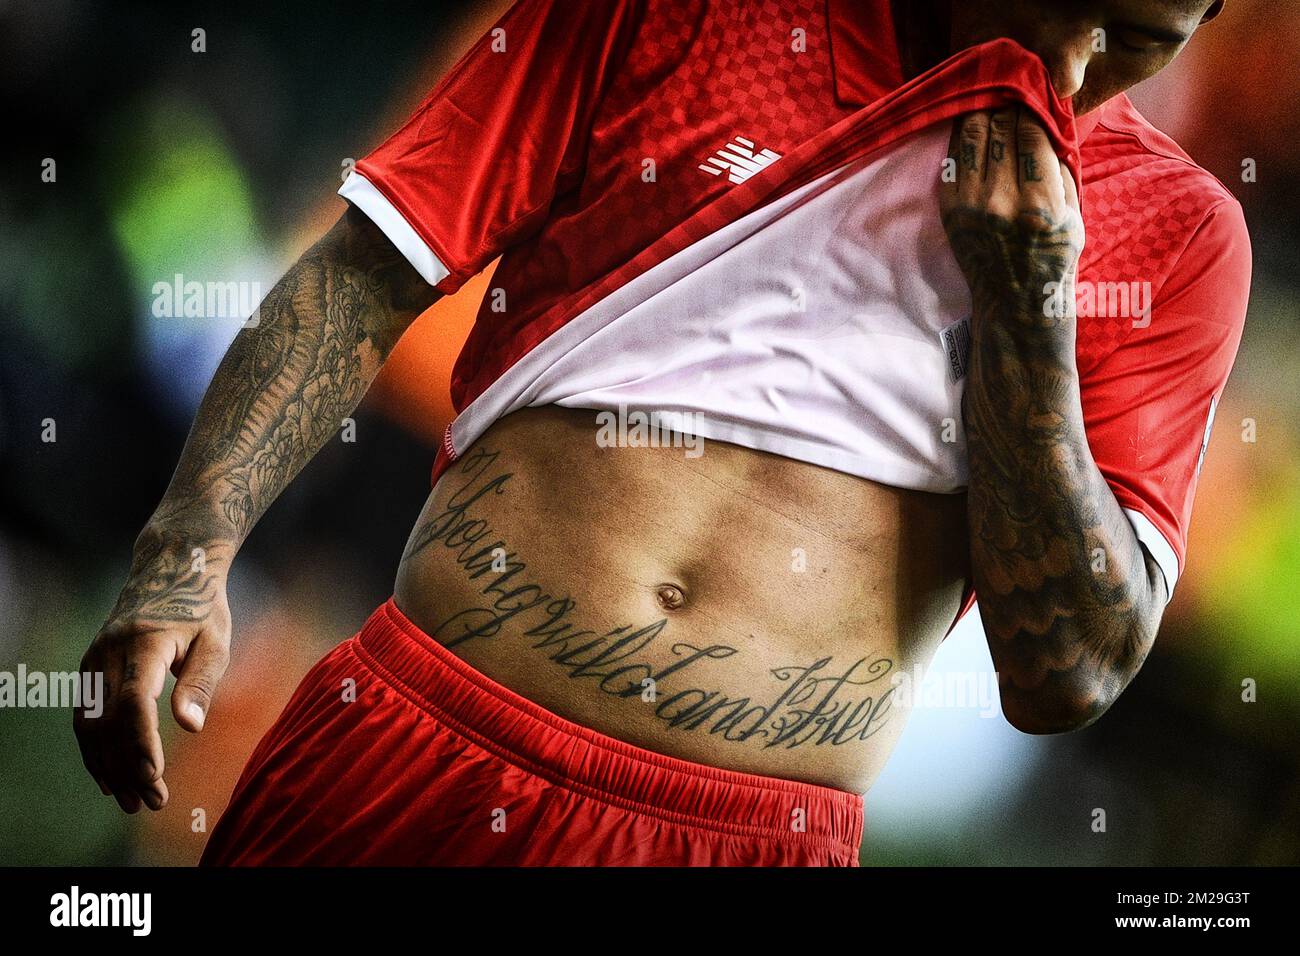 860+ Soccer Tattoo Stock Photos, Pictures & Royalty-Free Images - iStock |  Soccer player, Soccer fan, Football tattoo